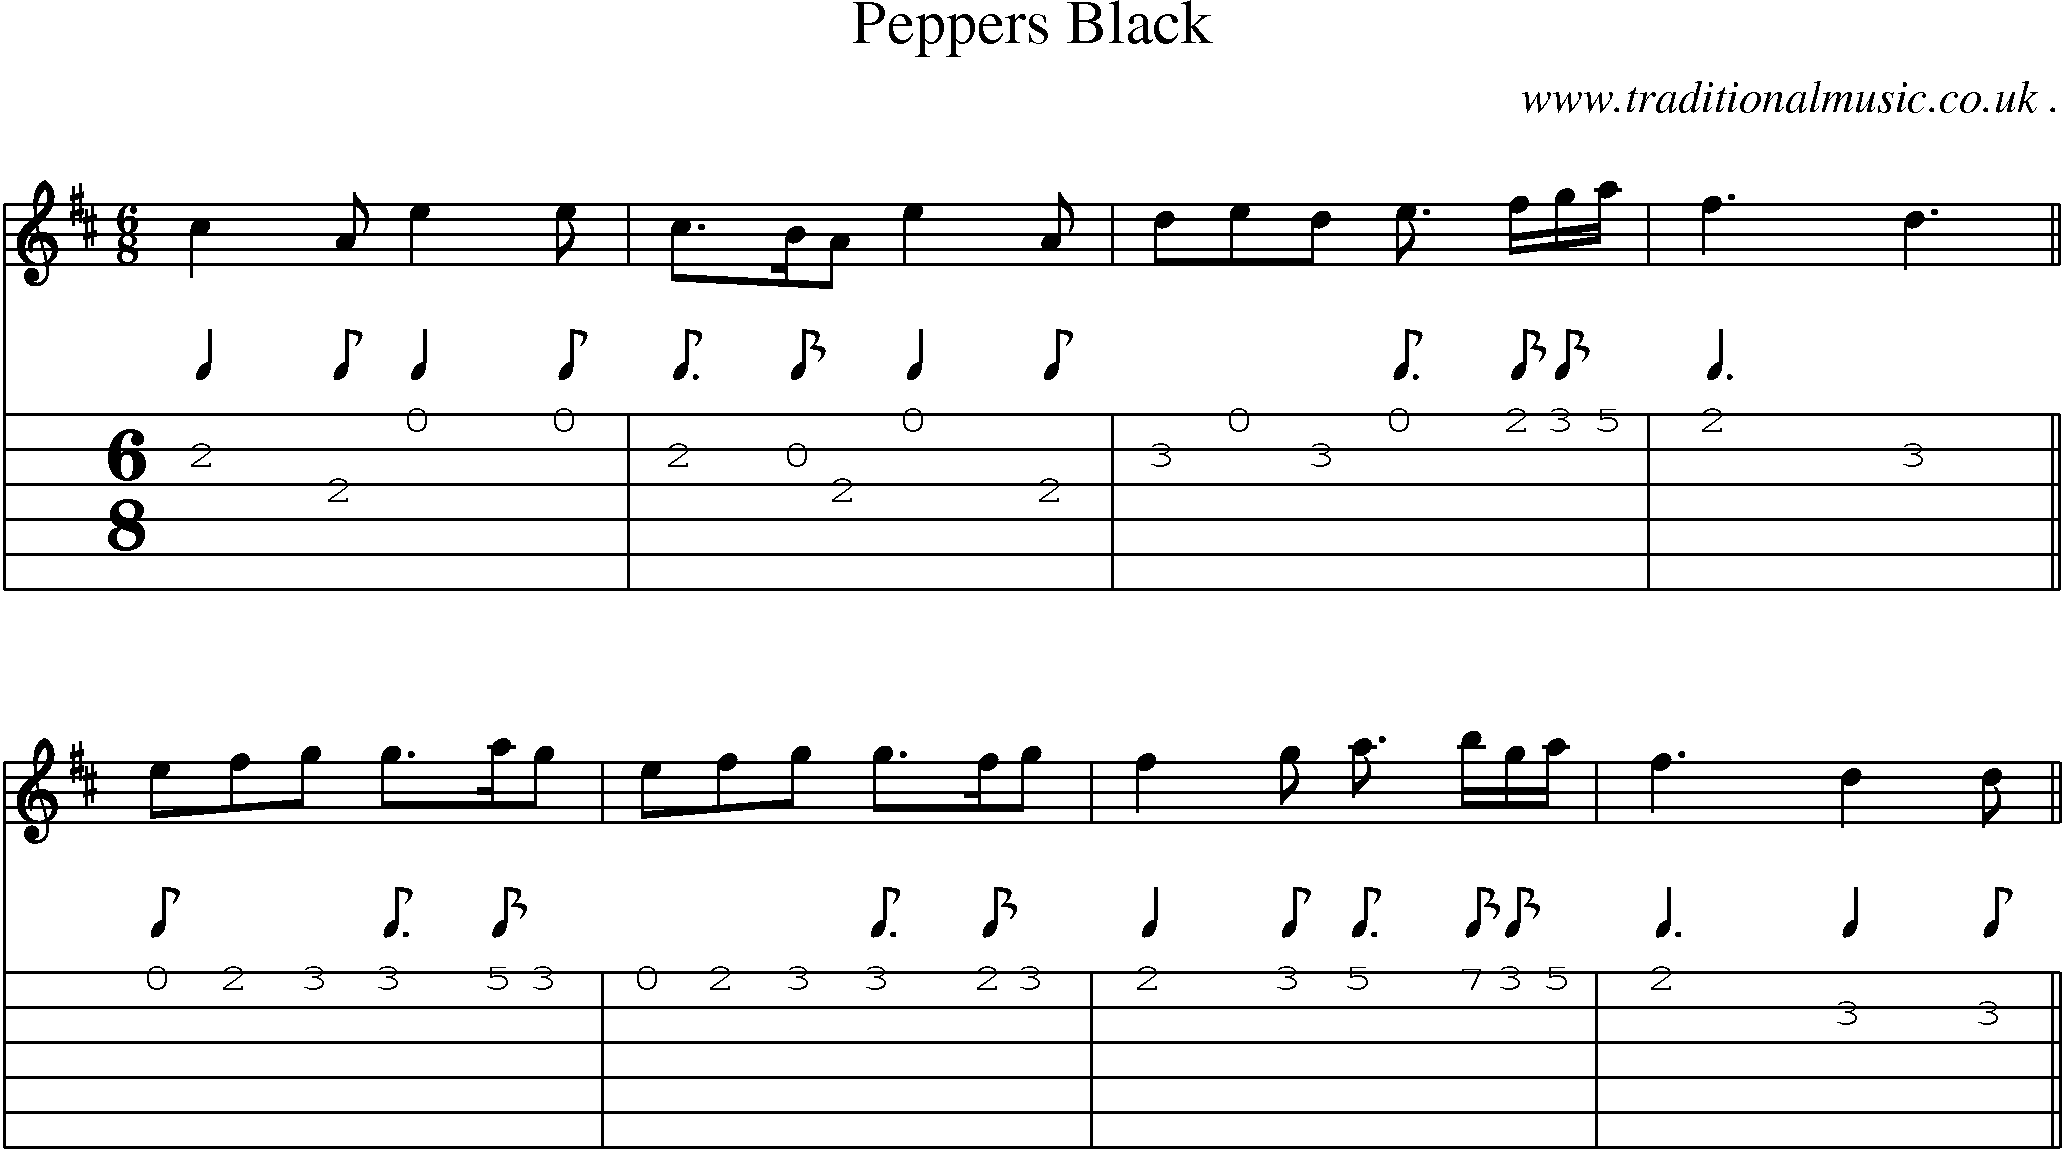 Sheet-music  score, Chords and Guitar Tabs for Peppers Black